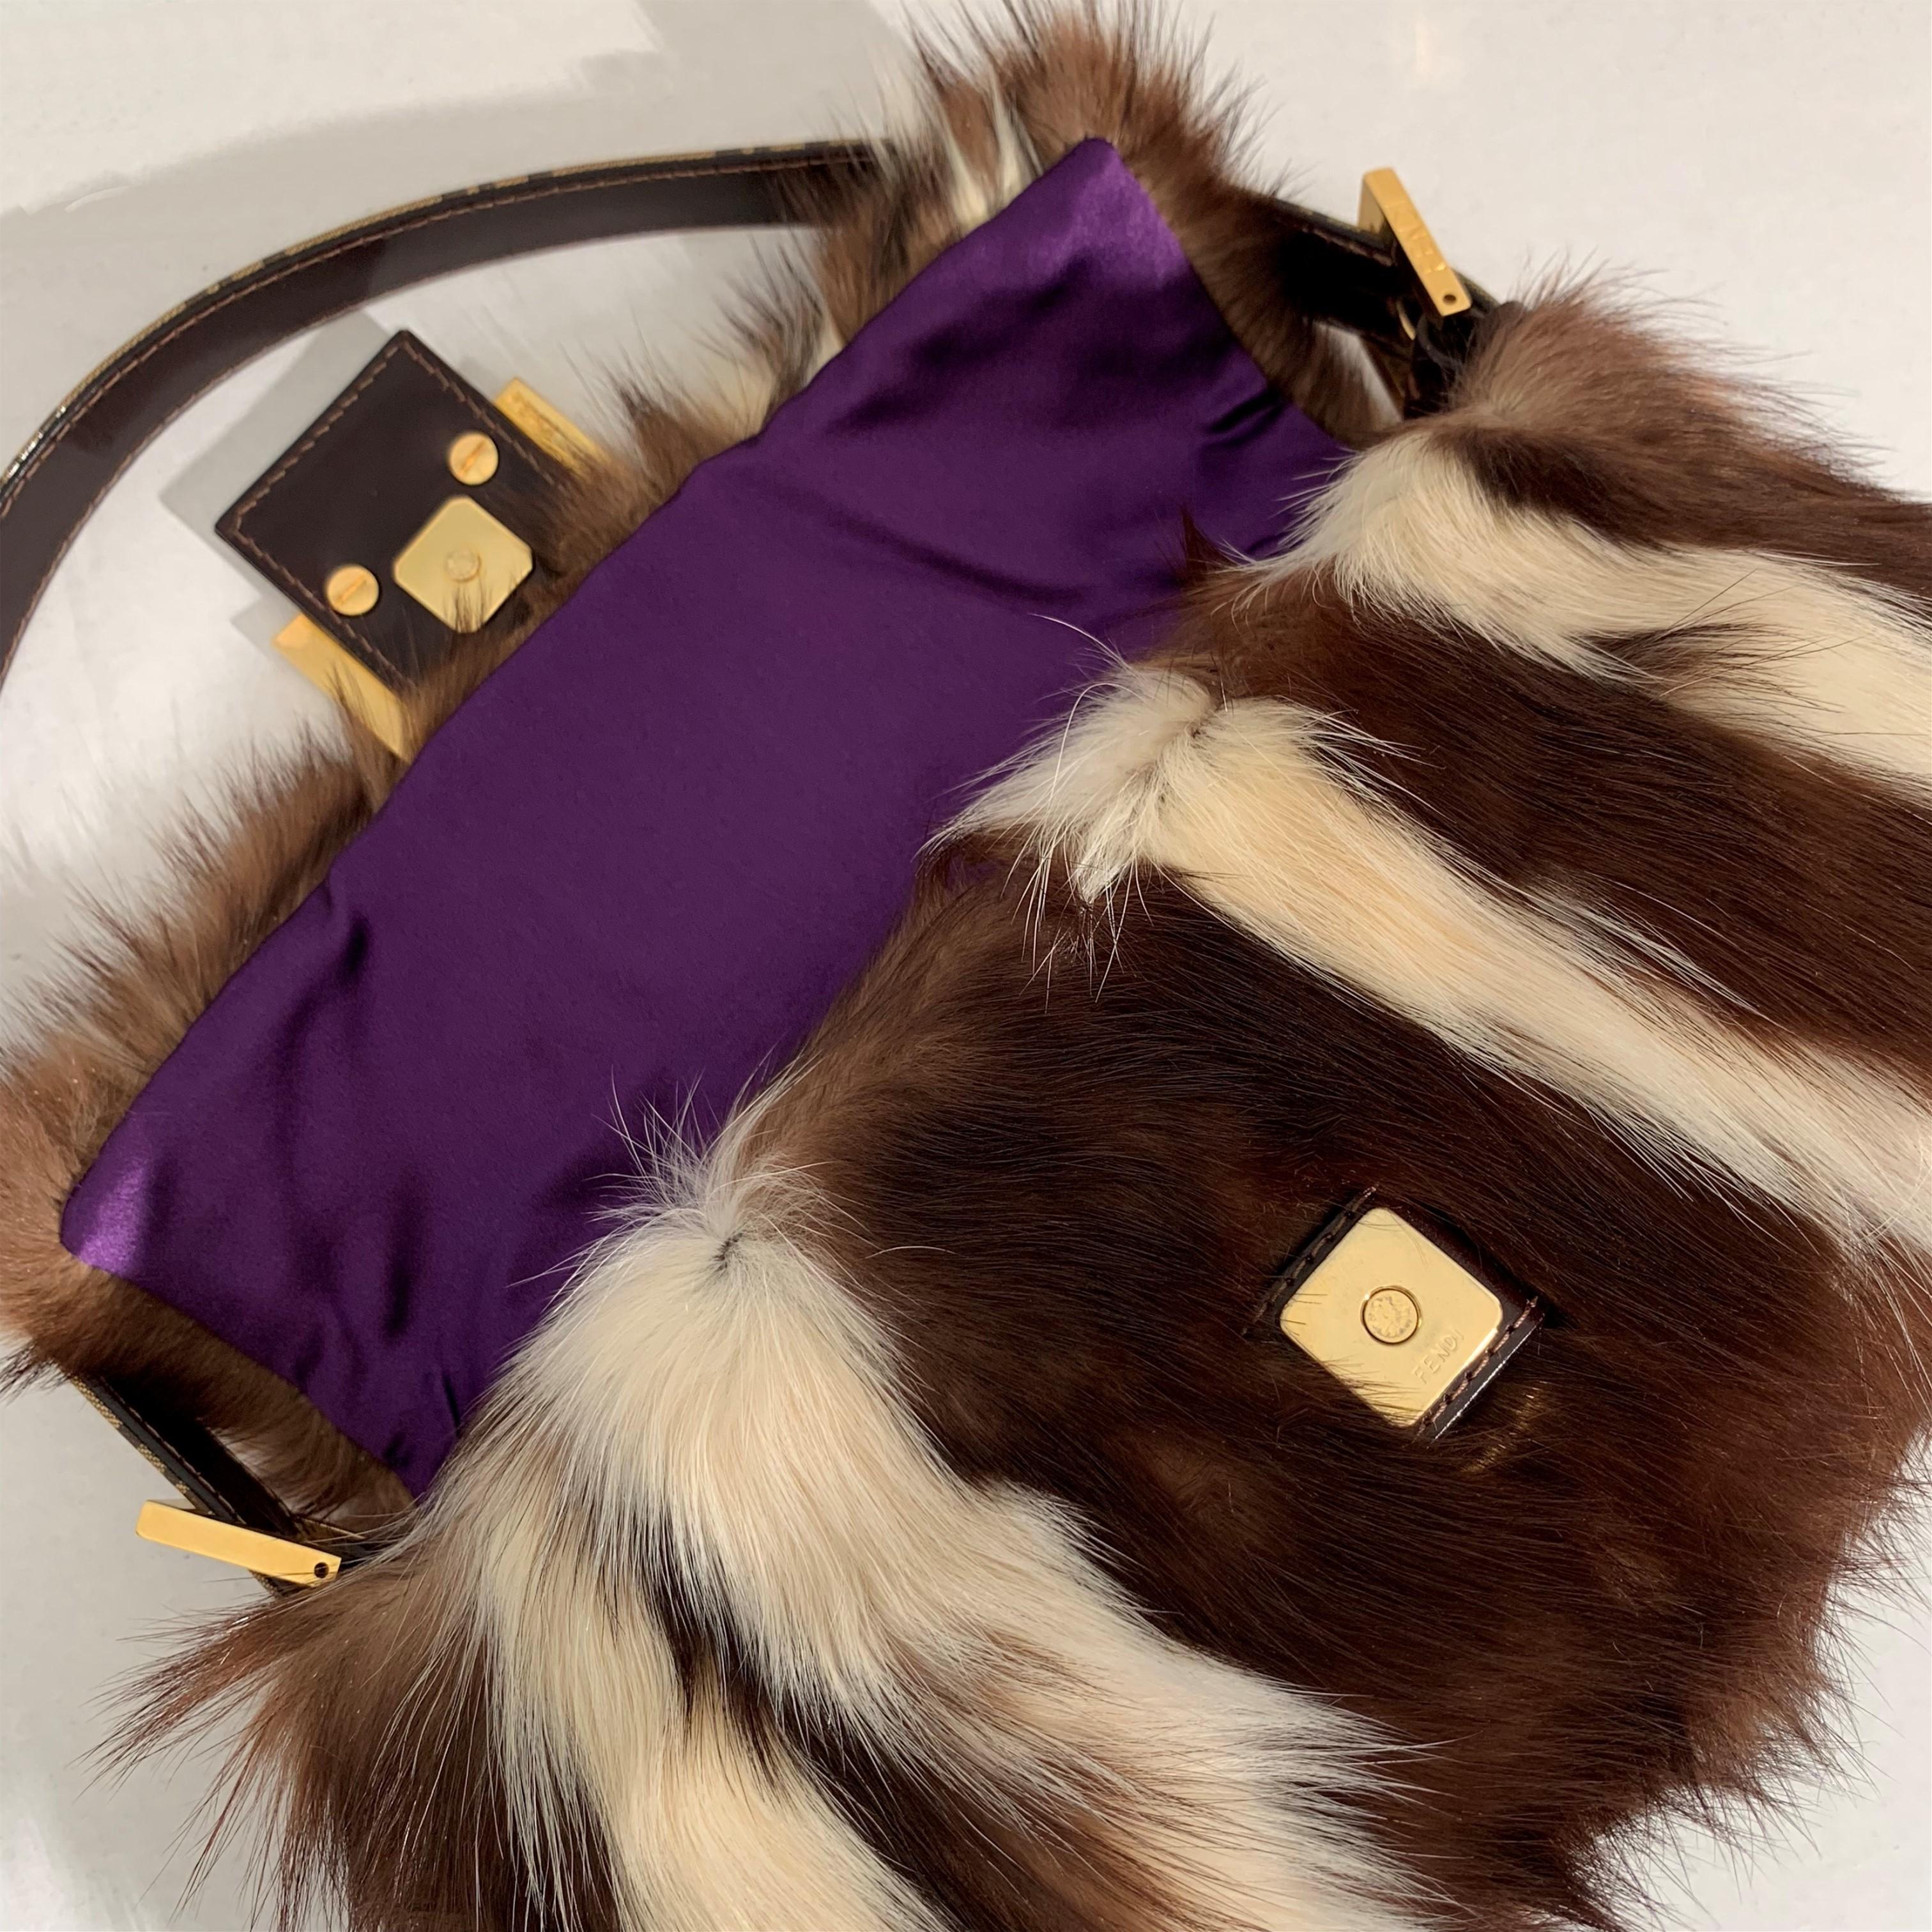 New Rare Fendi Fur Baguette Bag Featured in the 15th Anniversary Book Lt Edition 10